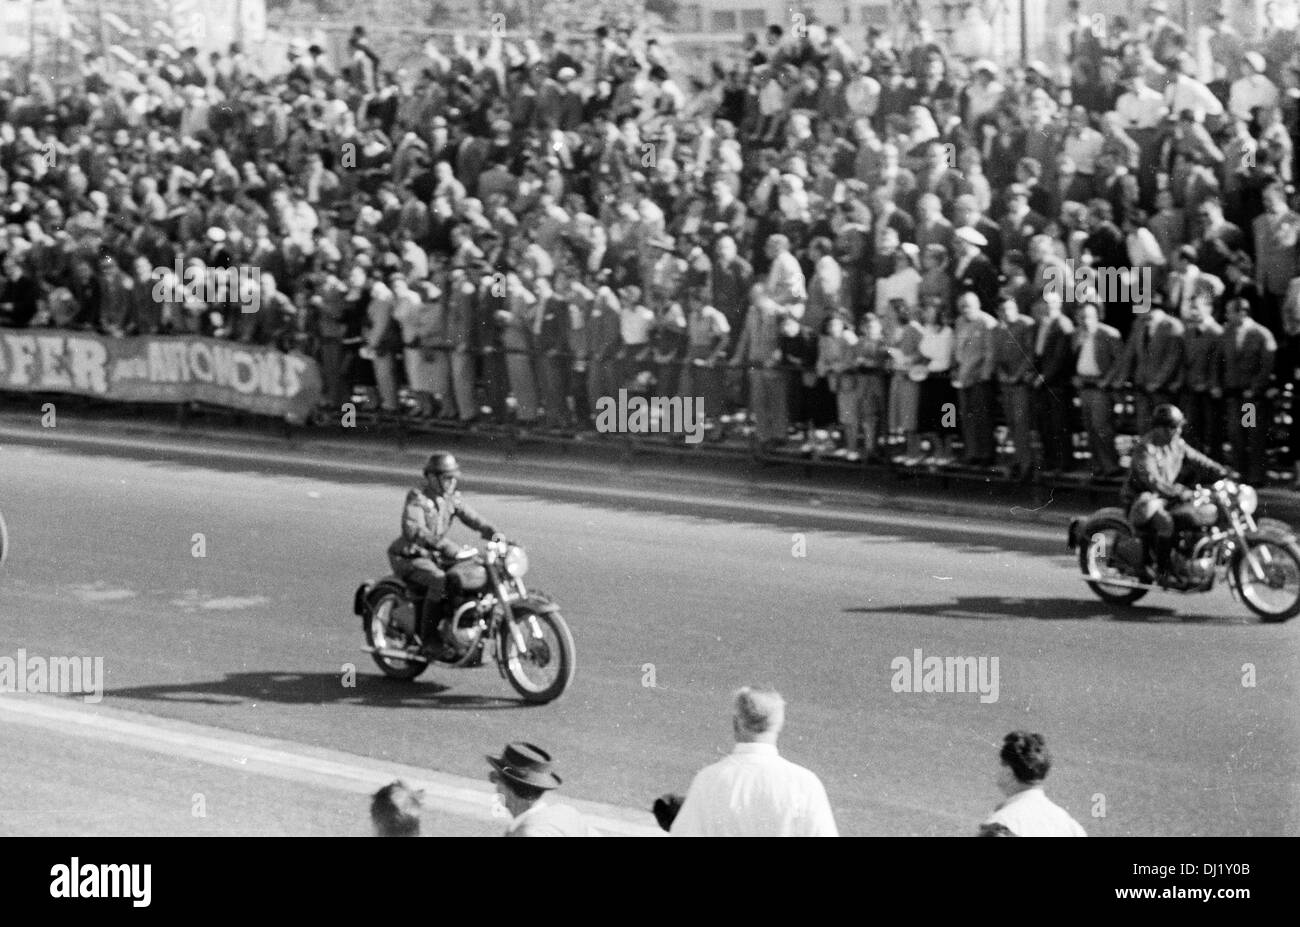 Spanish motorcycle police opening the Pedralbes boulevard circuit pre-race, Spanish Grand Prix, Pedralbes, Spain 24 Oct 1954. Stock Photo